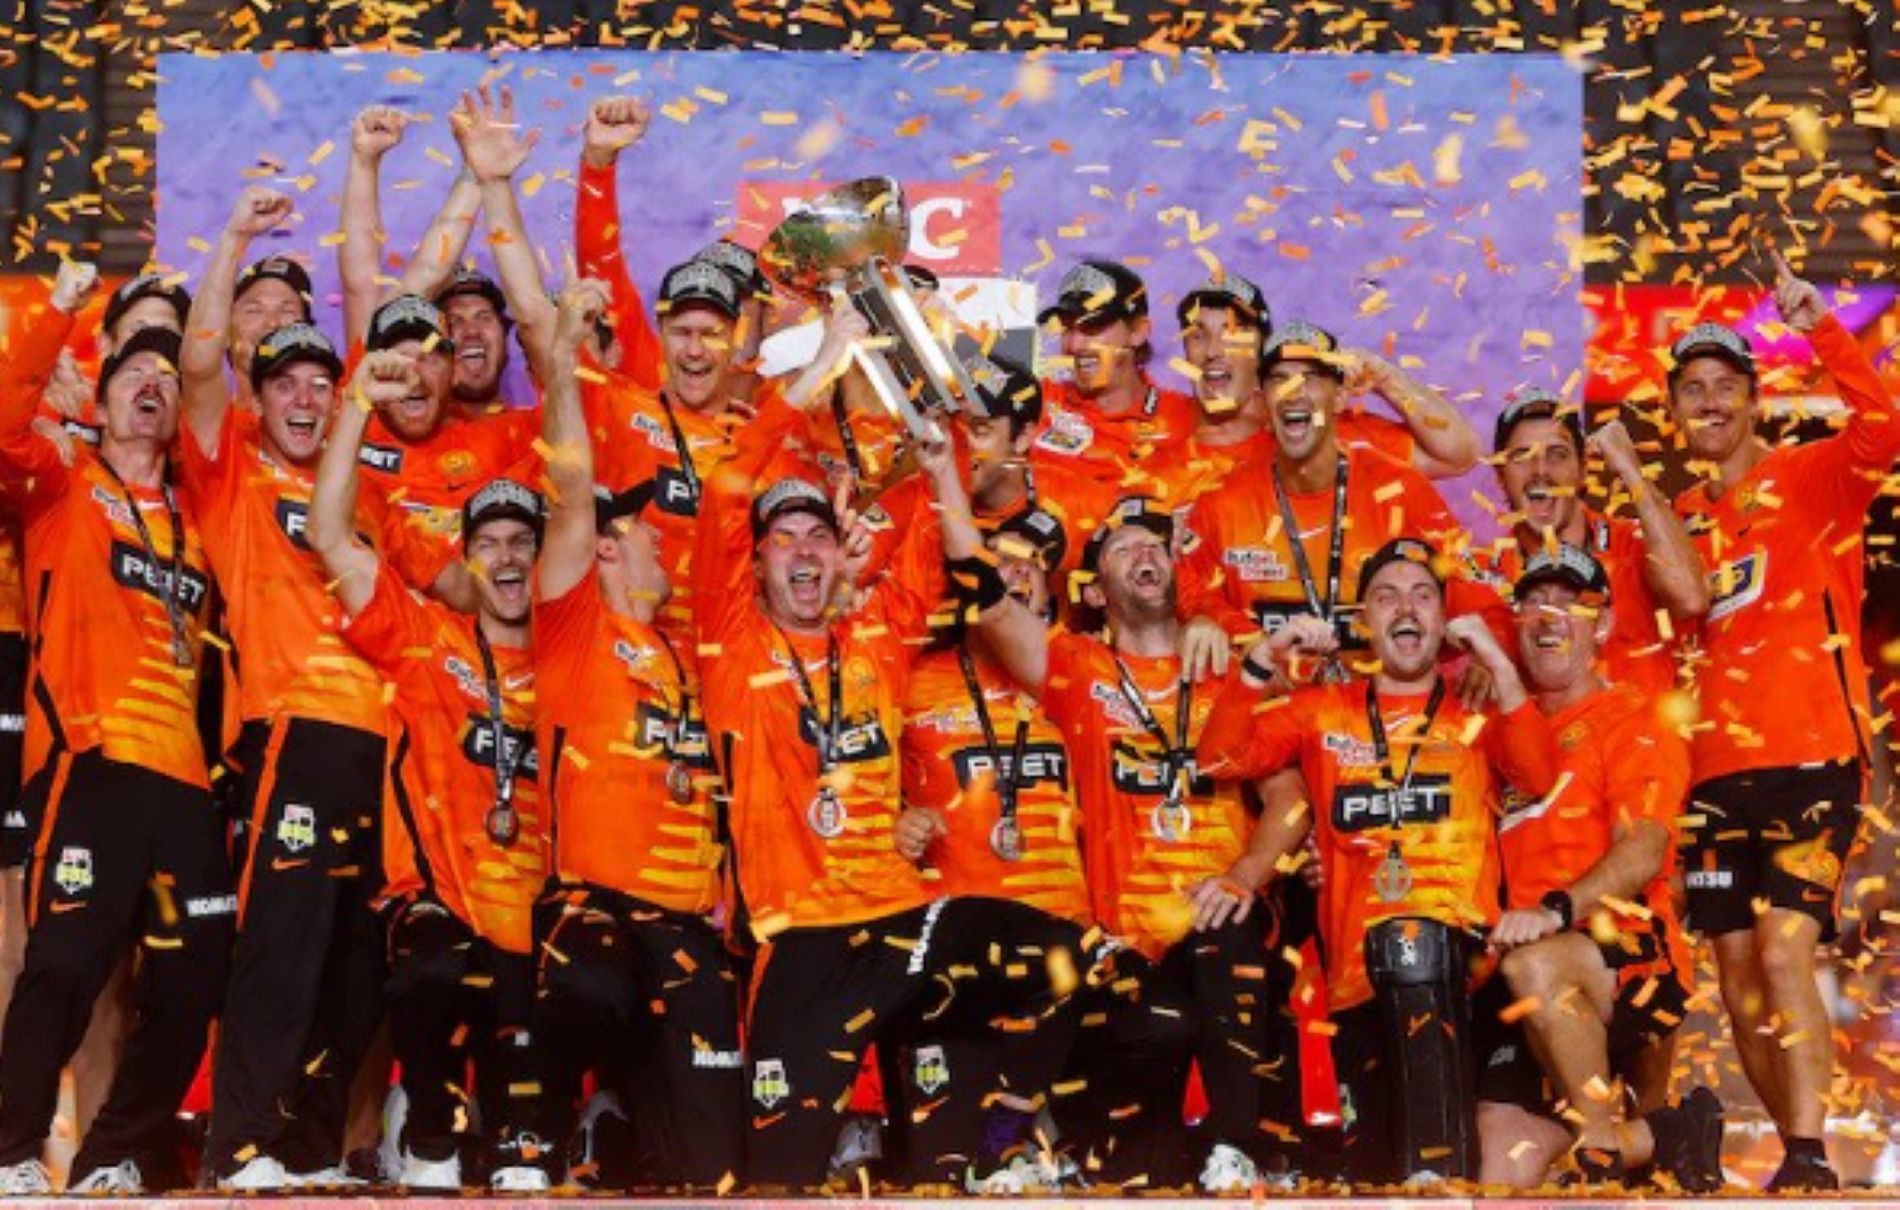 Perth Scorchers will be gunning for a hat trick of titles.